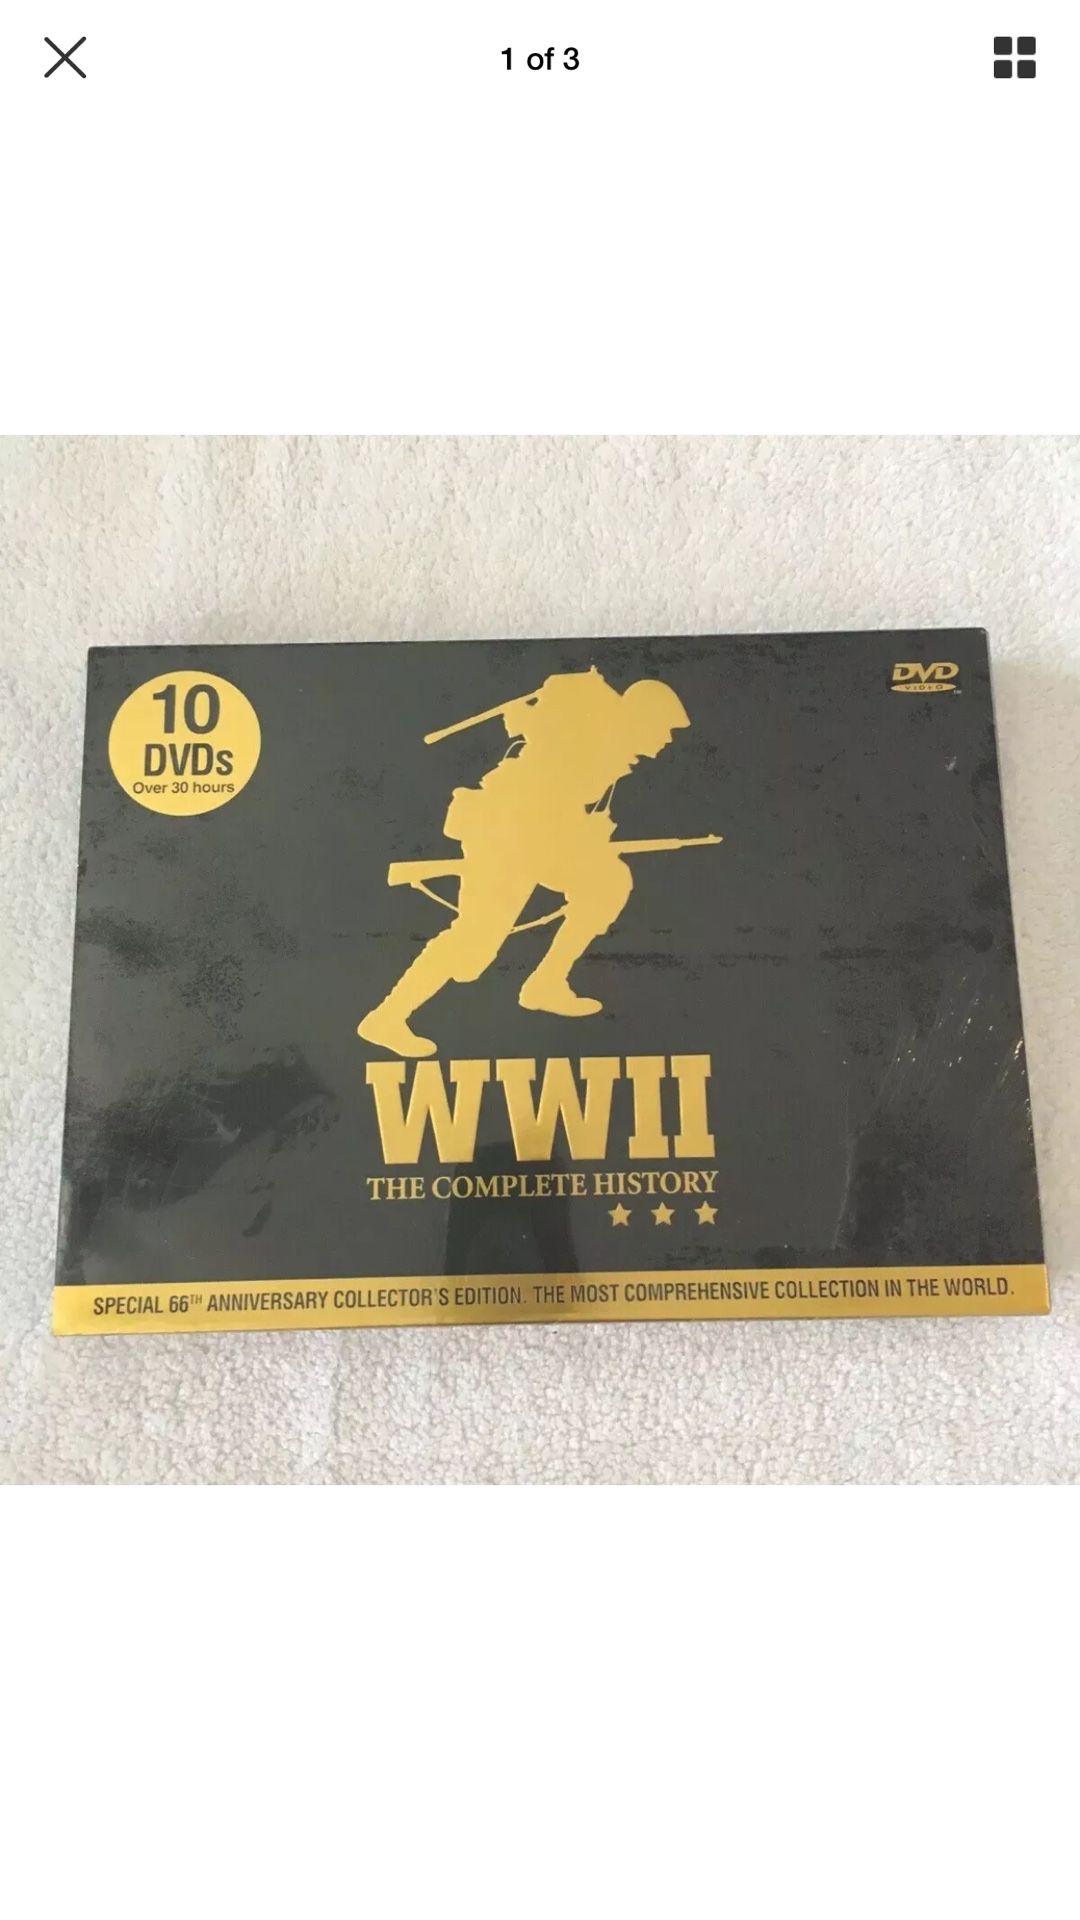 WWII the Complete History 10 dvds 30 hours